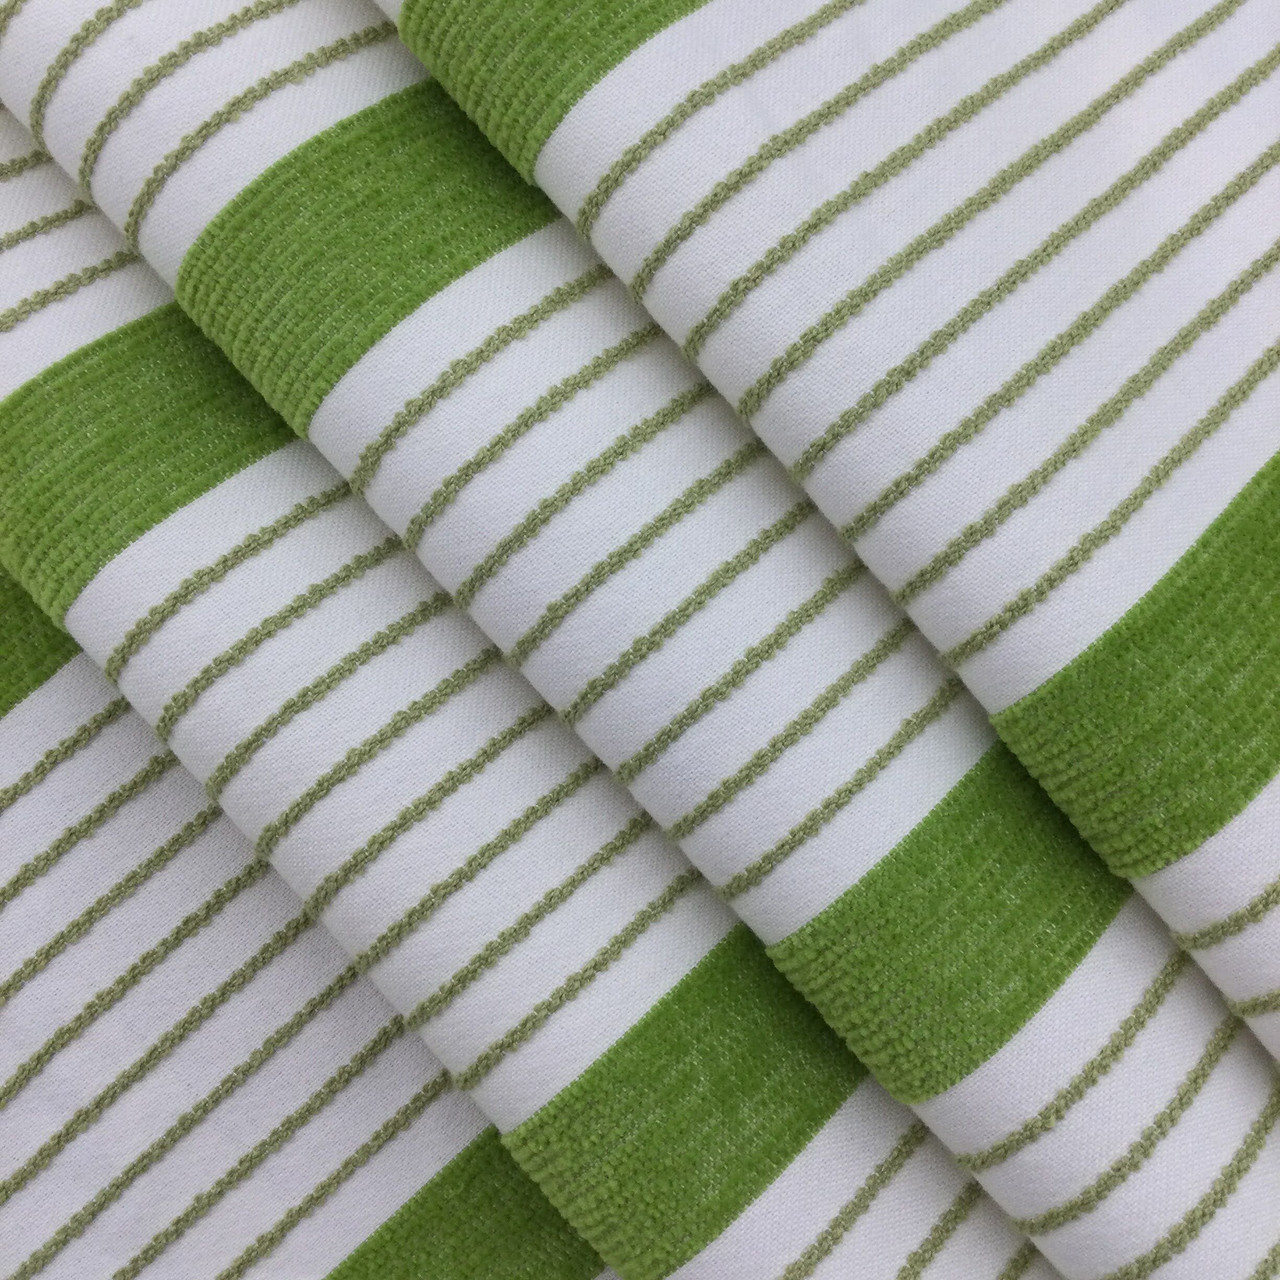 SALE! Designer Chunky Chenille Fabric - White With Color Yarns- Upholstery